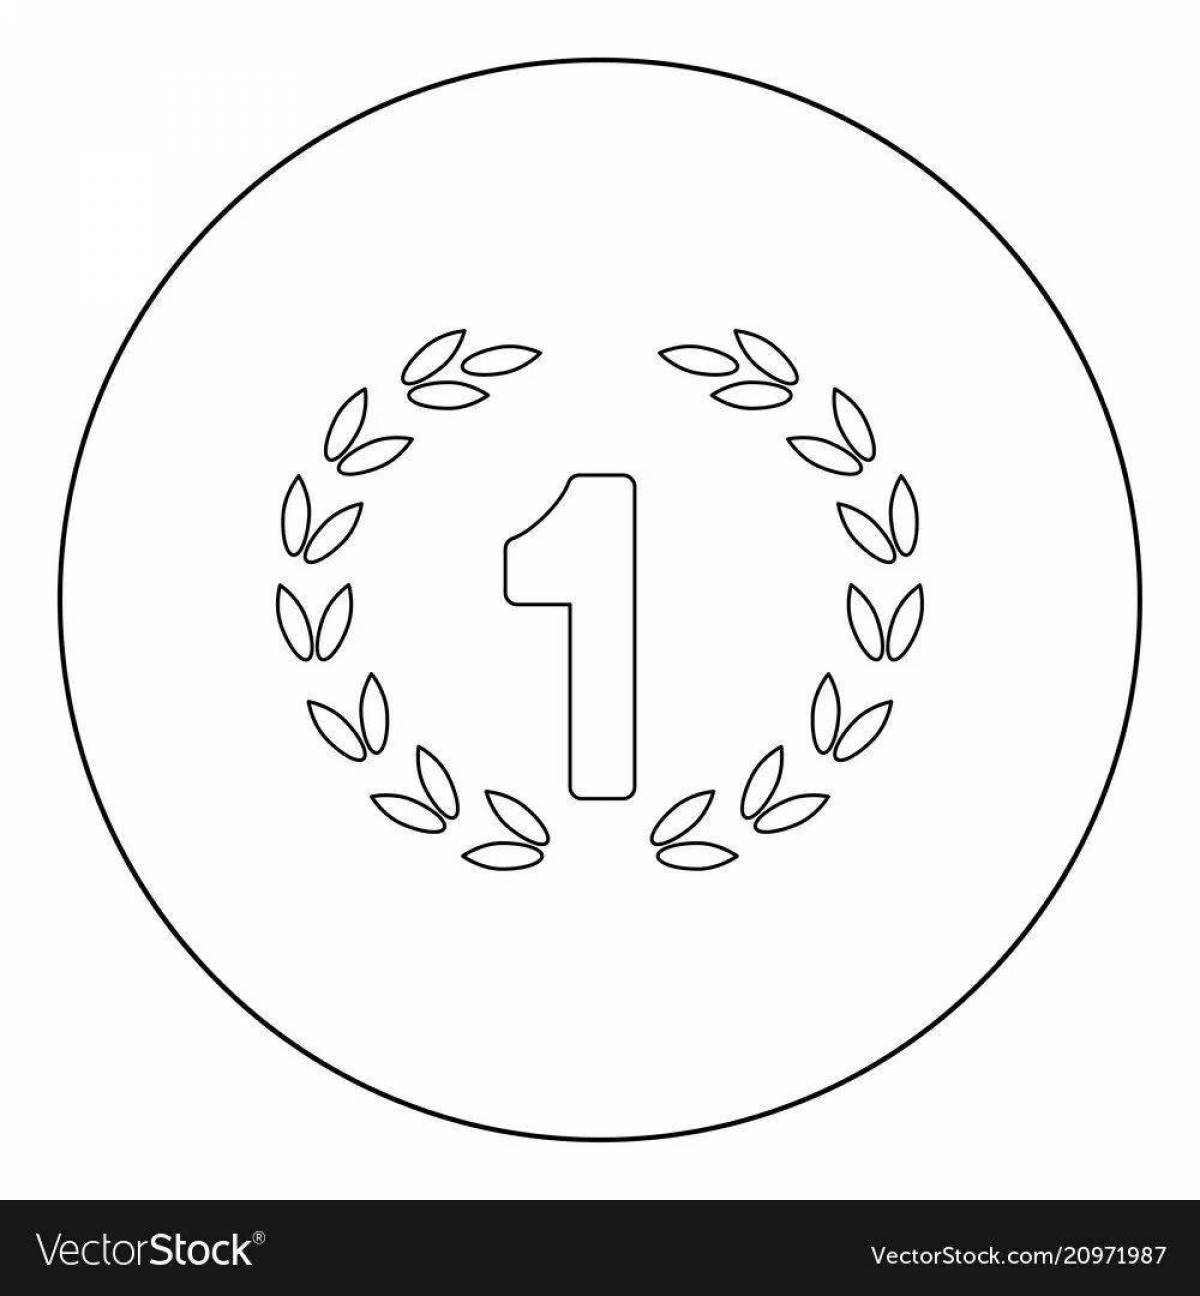 Colorful 1st place medal coloring page